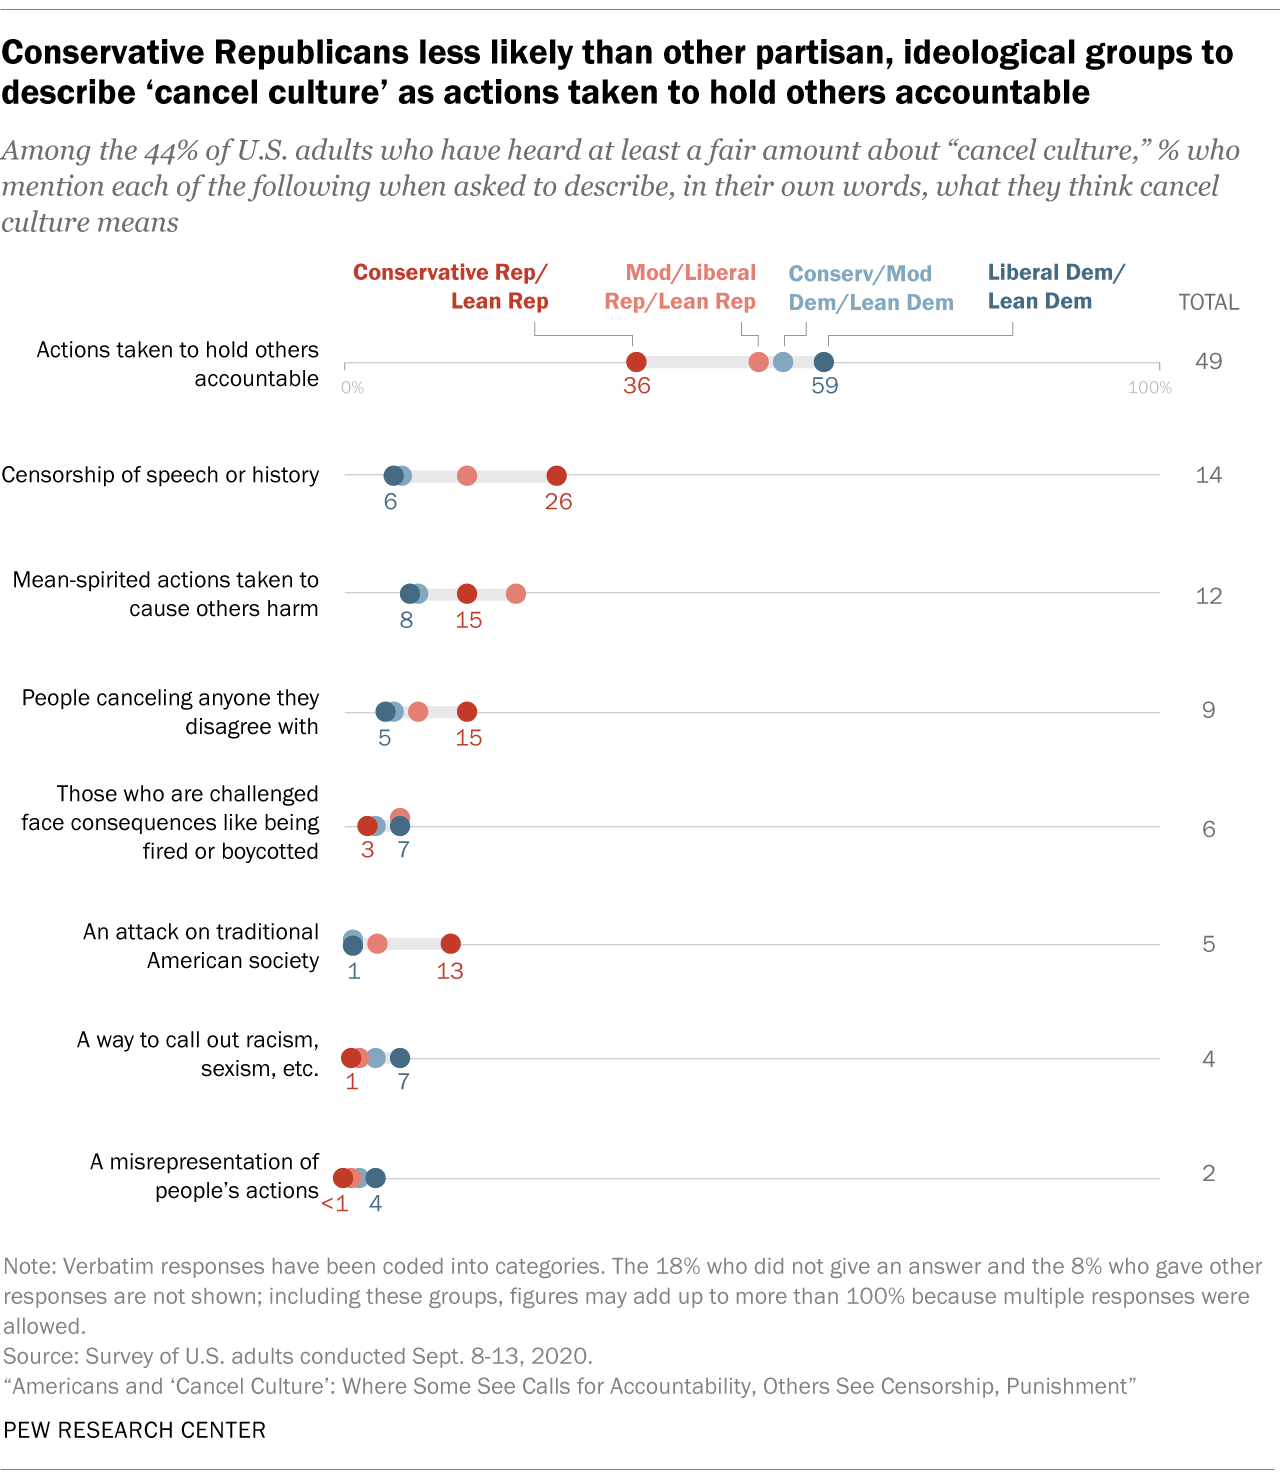 A chart showing that conservative Republicans are less likely than other partisan, ideological groups to describe ‘cancel culture’ as actions taken to hold others accountable